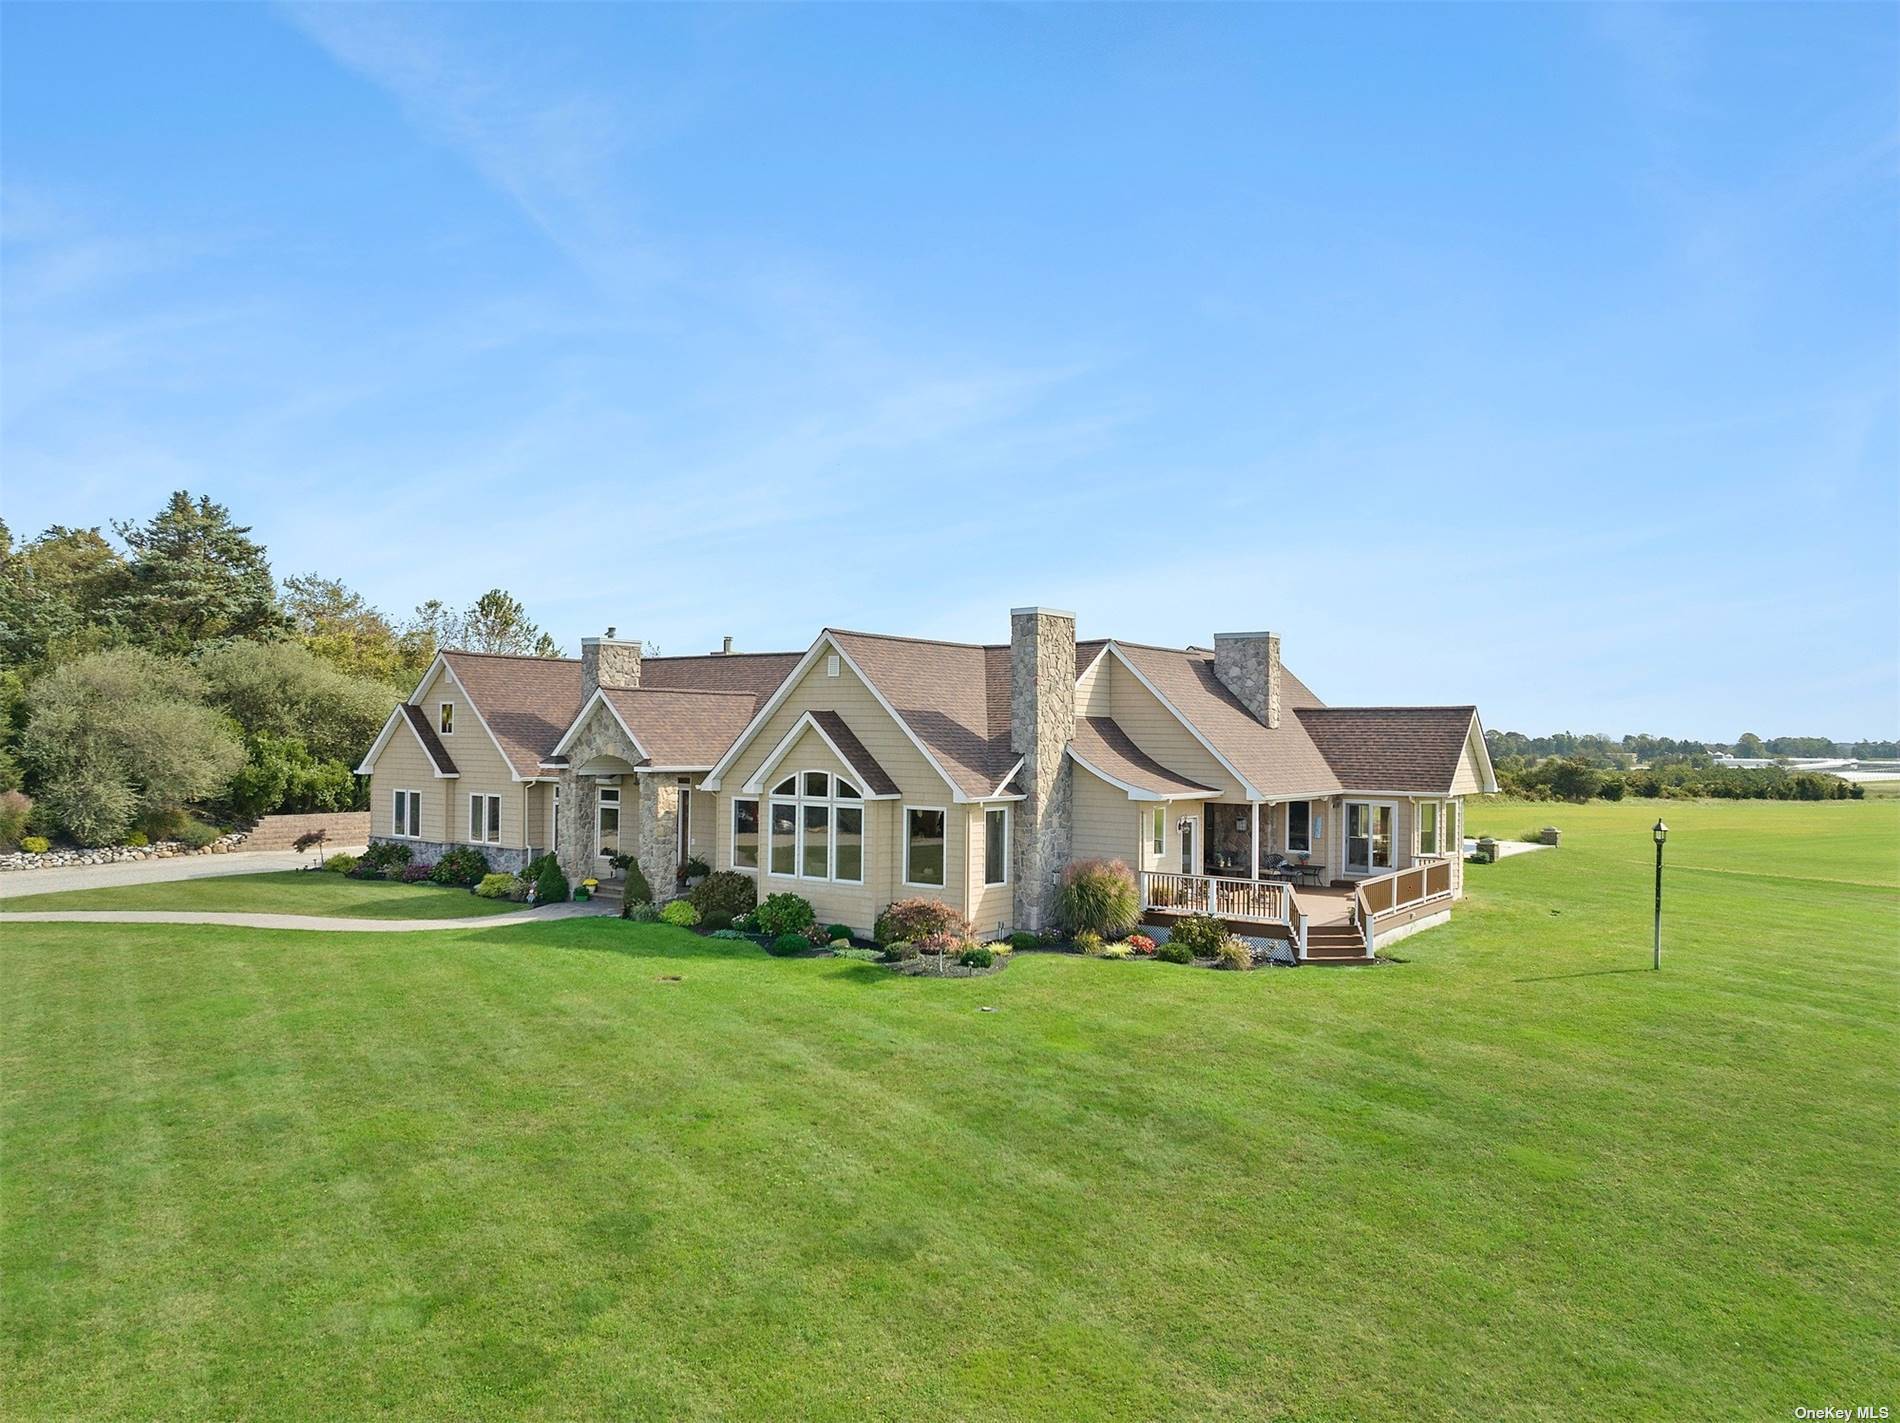 A long winding driveway rises to this spectacular 56 acre property and beautifully built five bedroom 3.